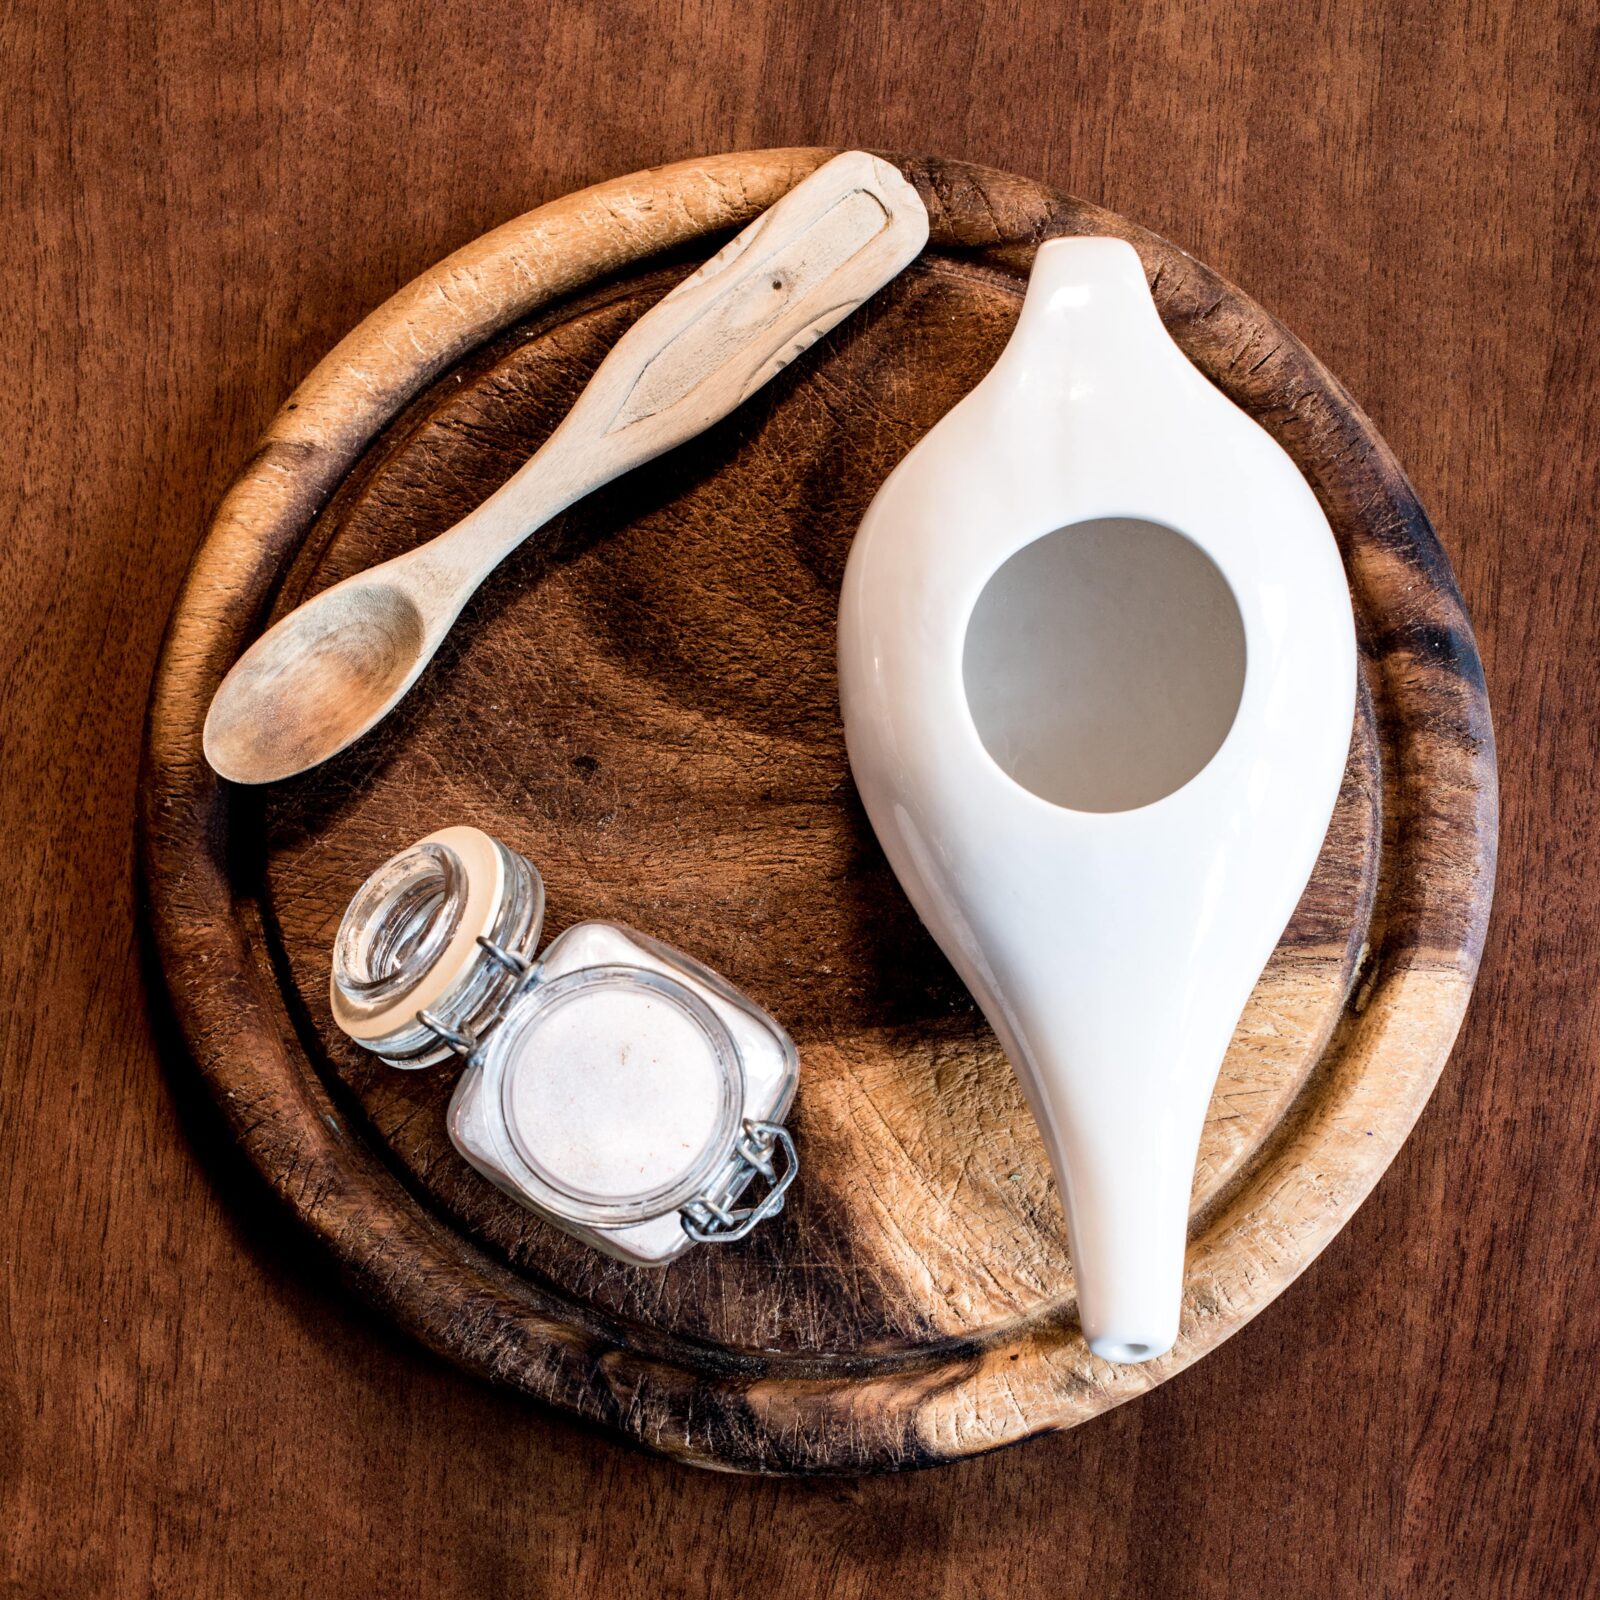 neti pot on a wood tray beside wooden spoon and jar of salt